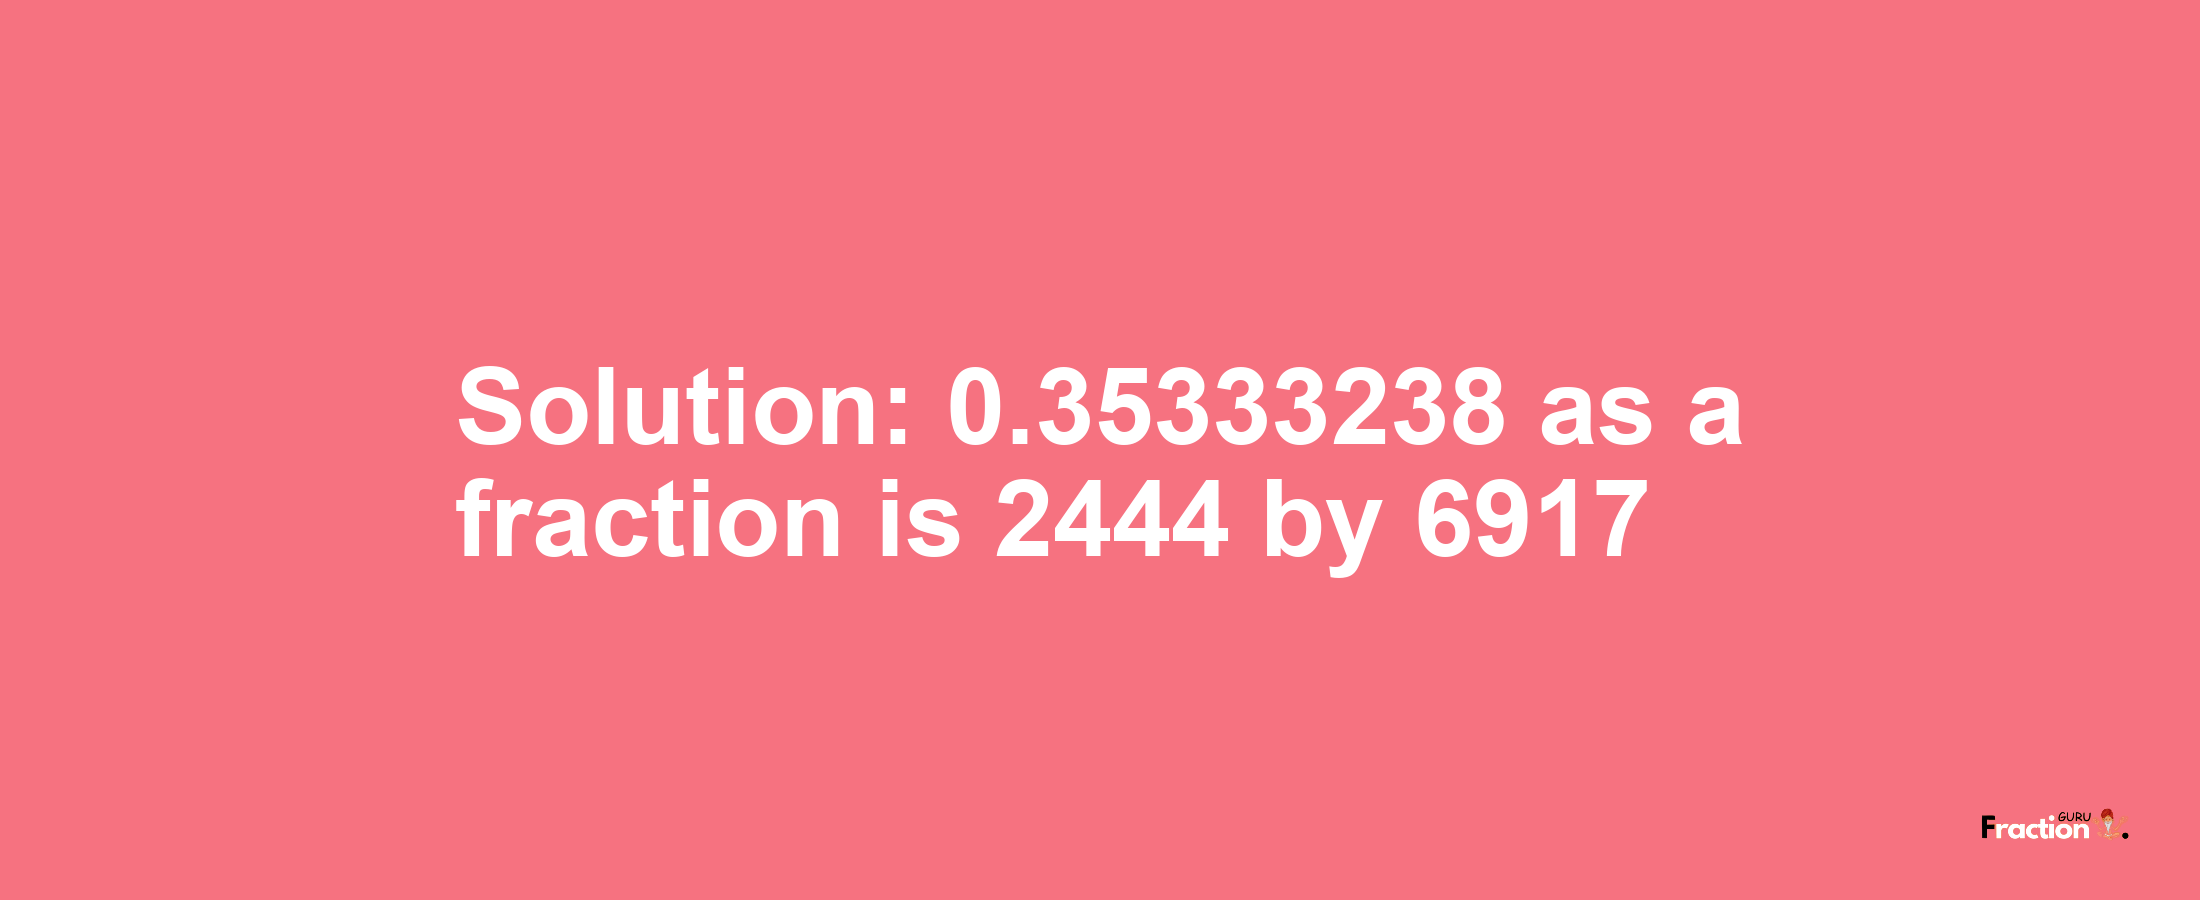 Solution:0.35333238 as a fraction is 2444/6917